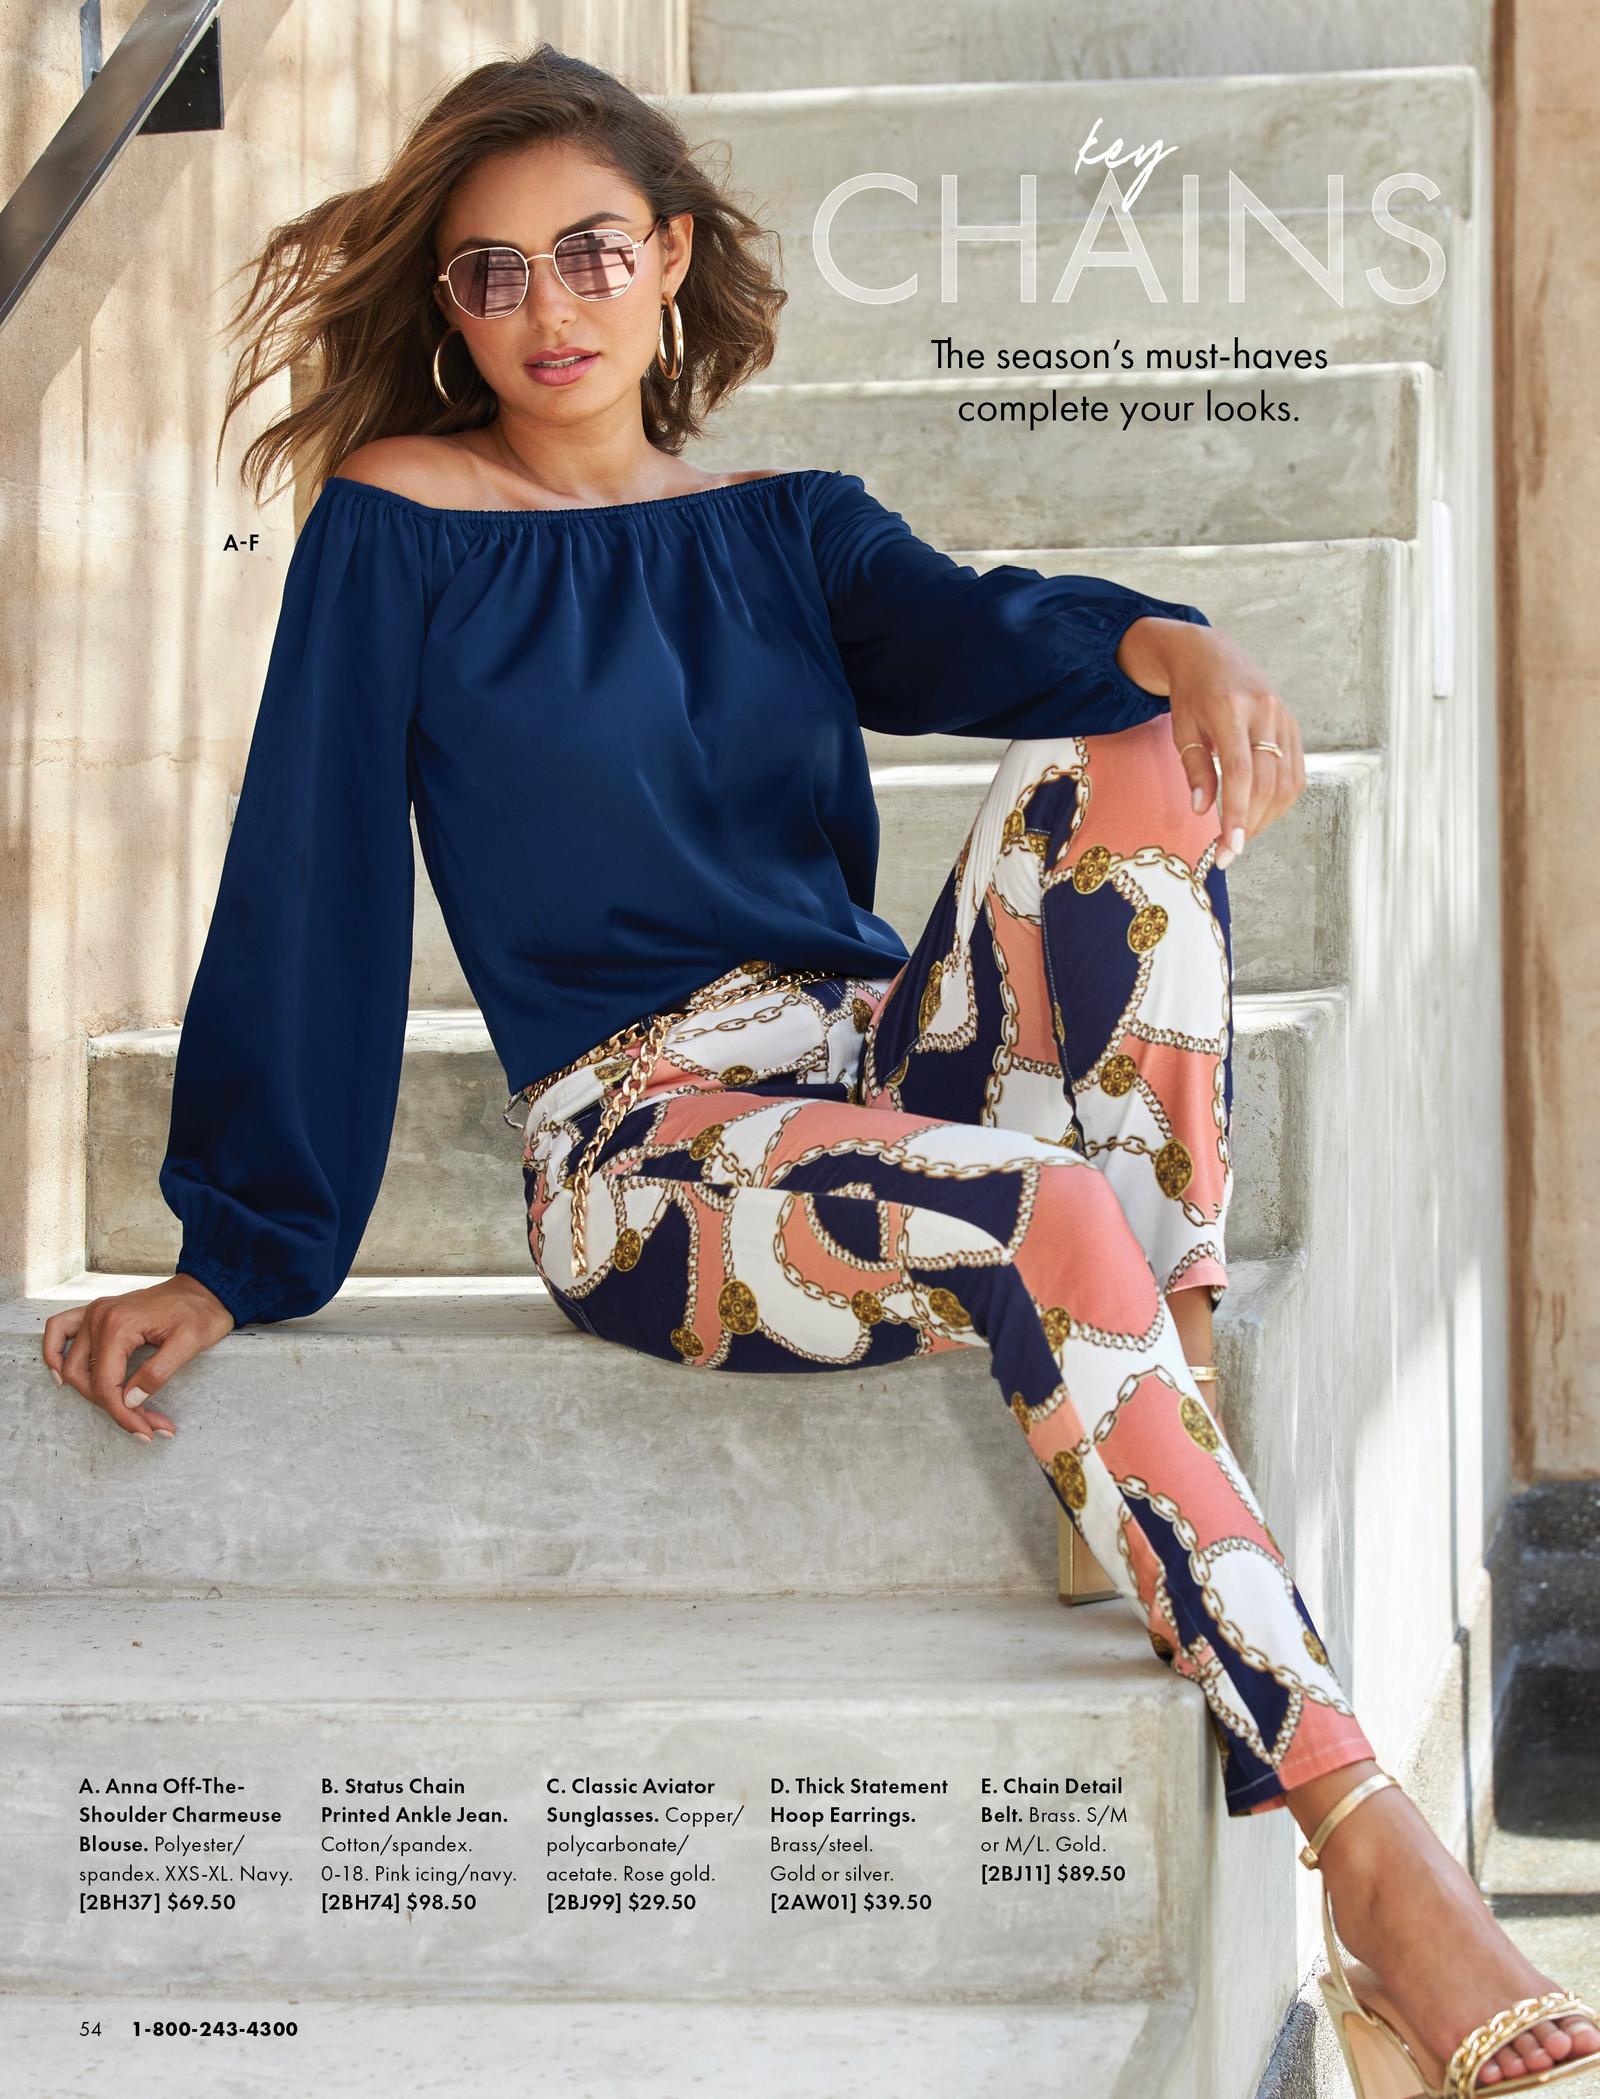 model wearing a navy off-the-shoulder balloon sleeve blouse, status print multicolored pants, tan wedges, mirrored aviator sunglasses, and silver hoop earrings.